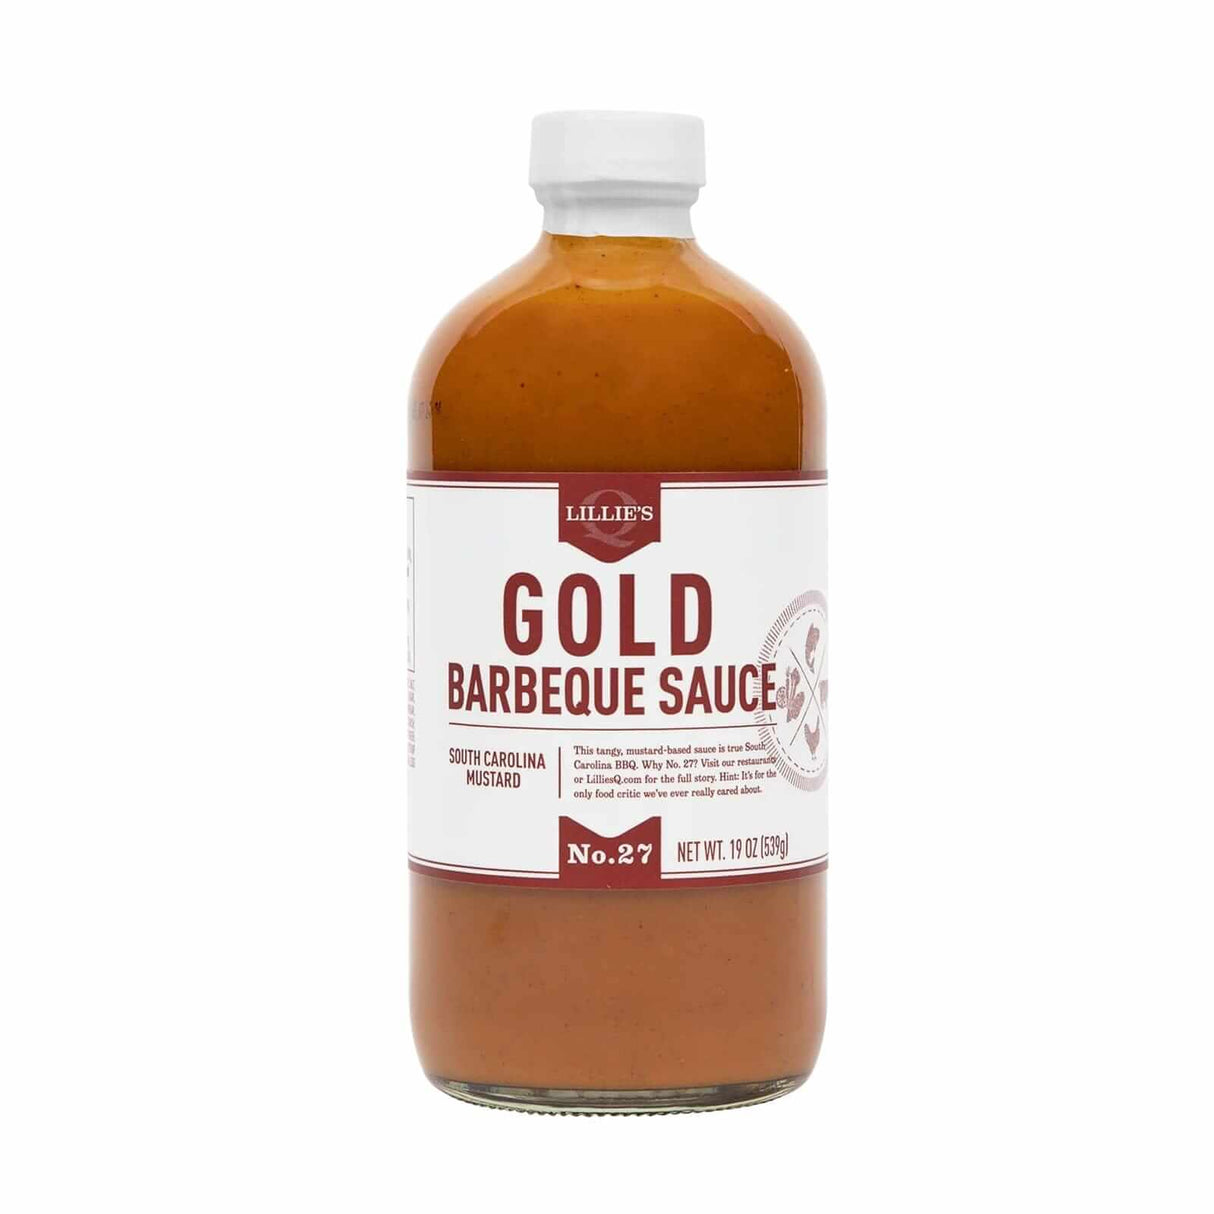 Lillie's Gold Barbeque Sauce